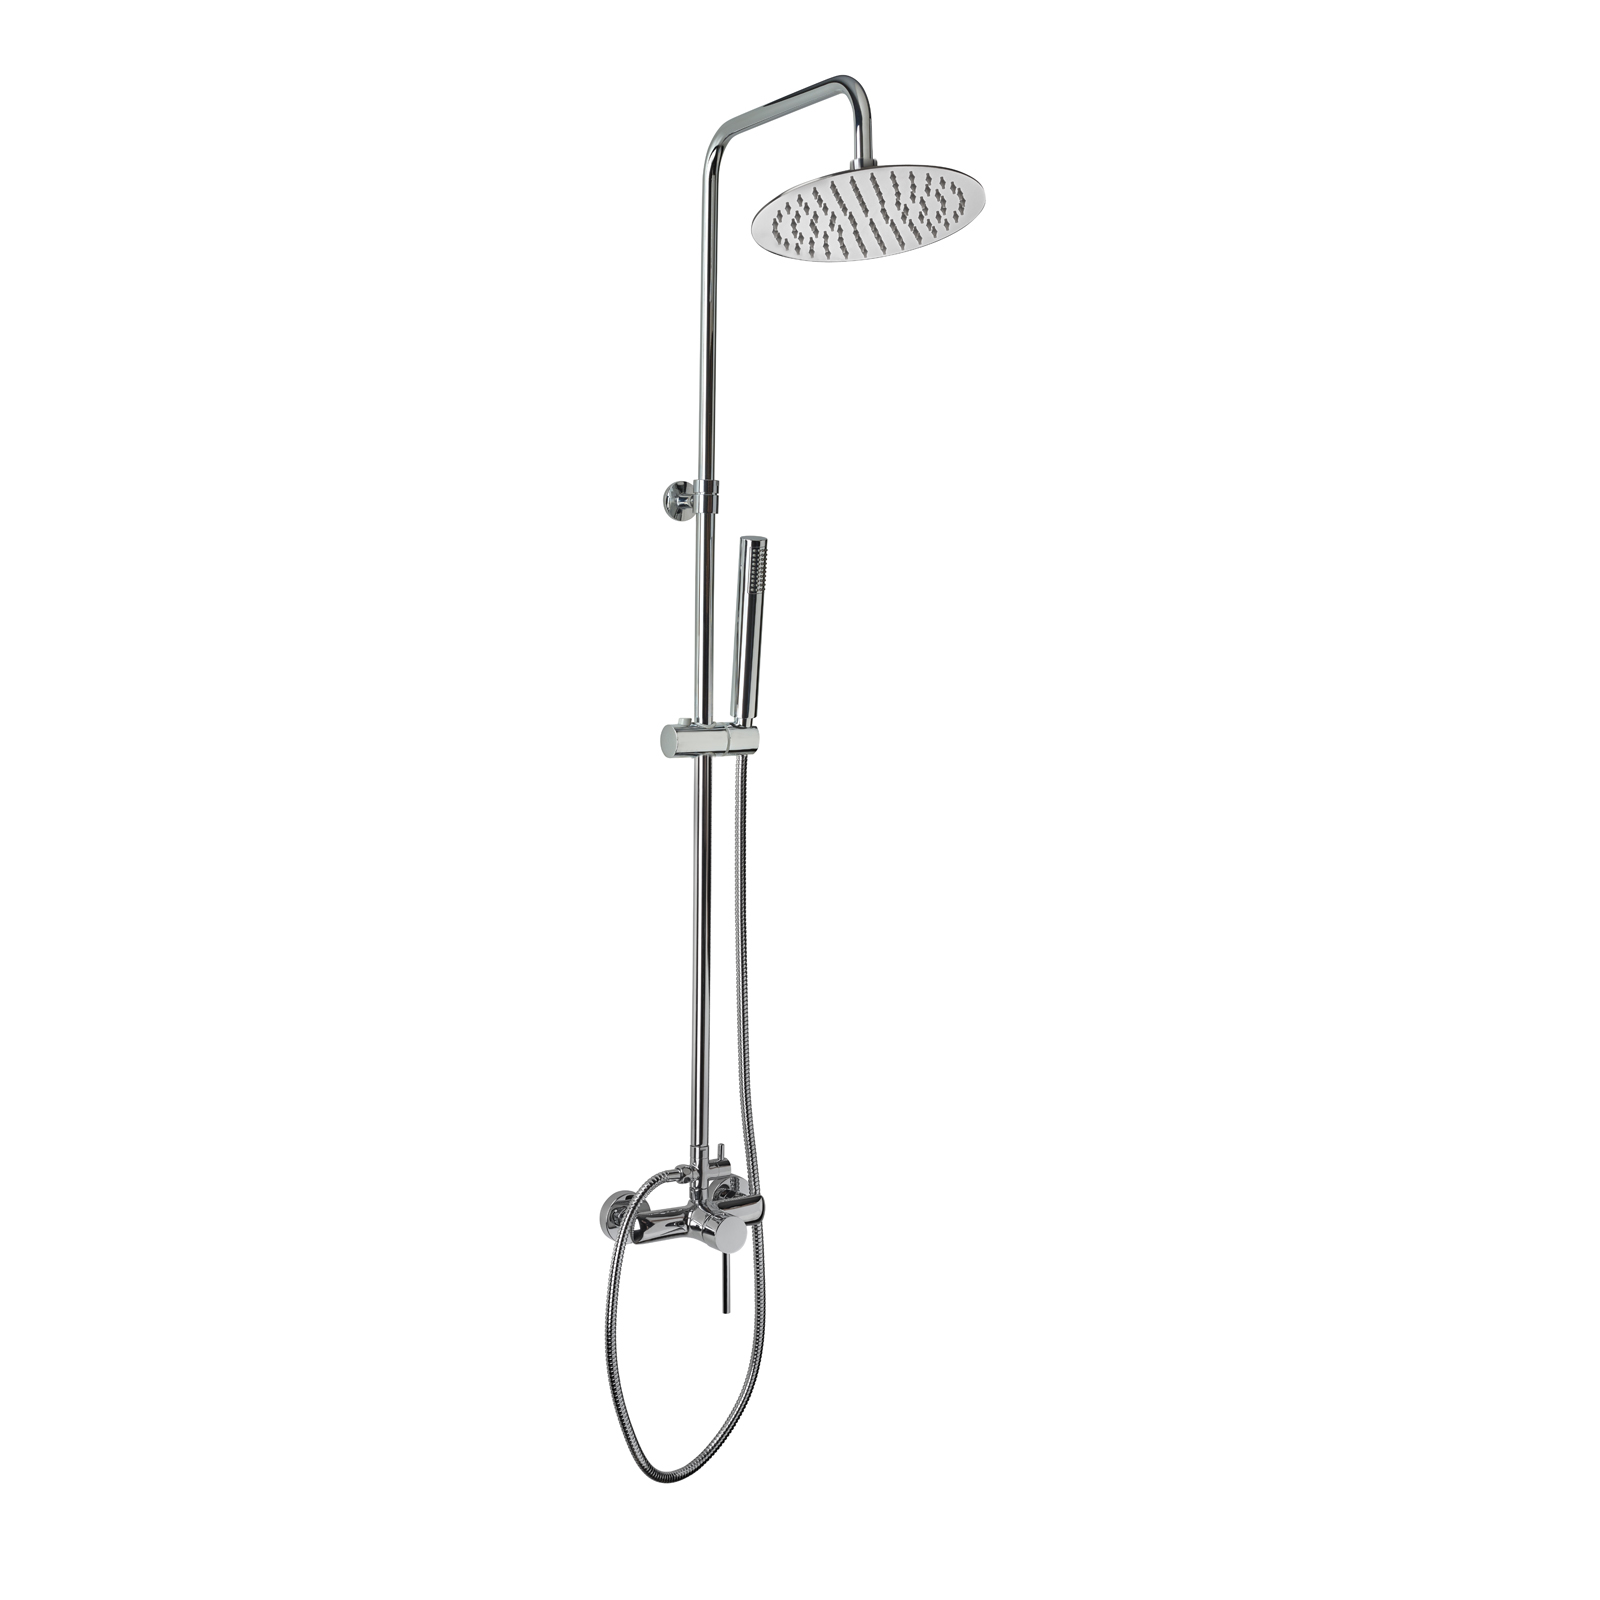 Telescopic shower column with shower mixer valve, automatic diverter, shower rose and self cleaning hand shower